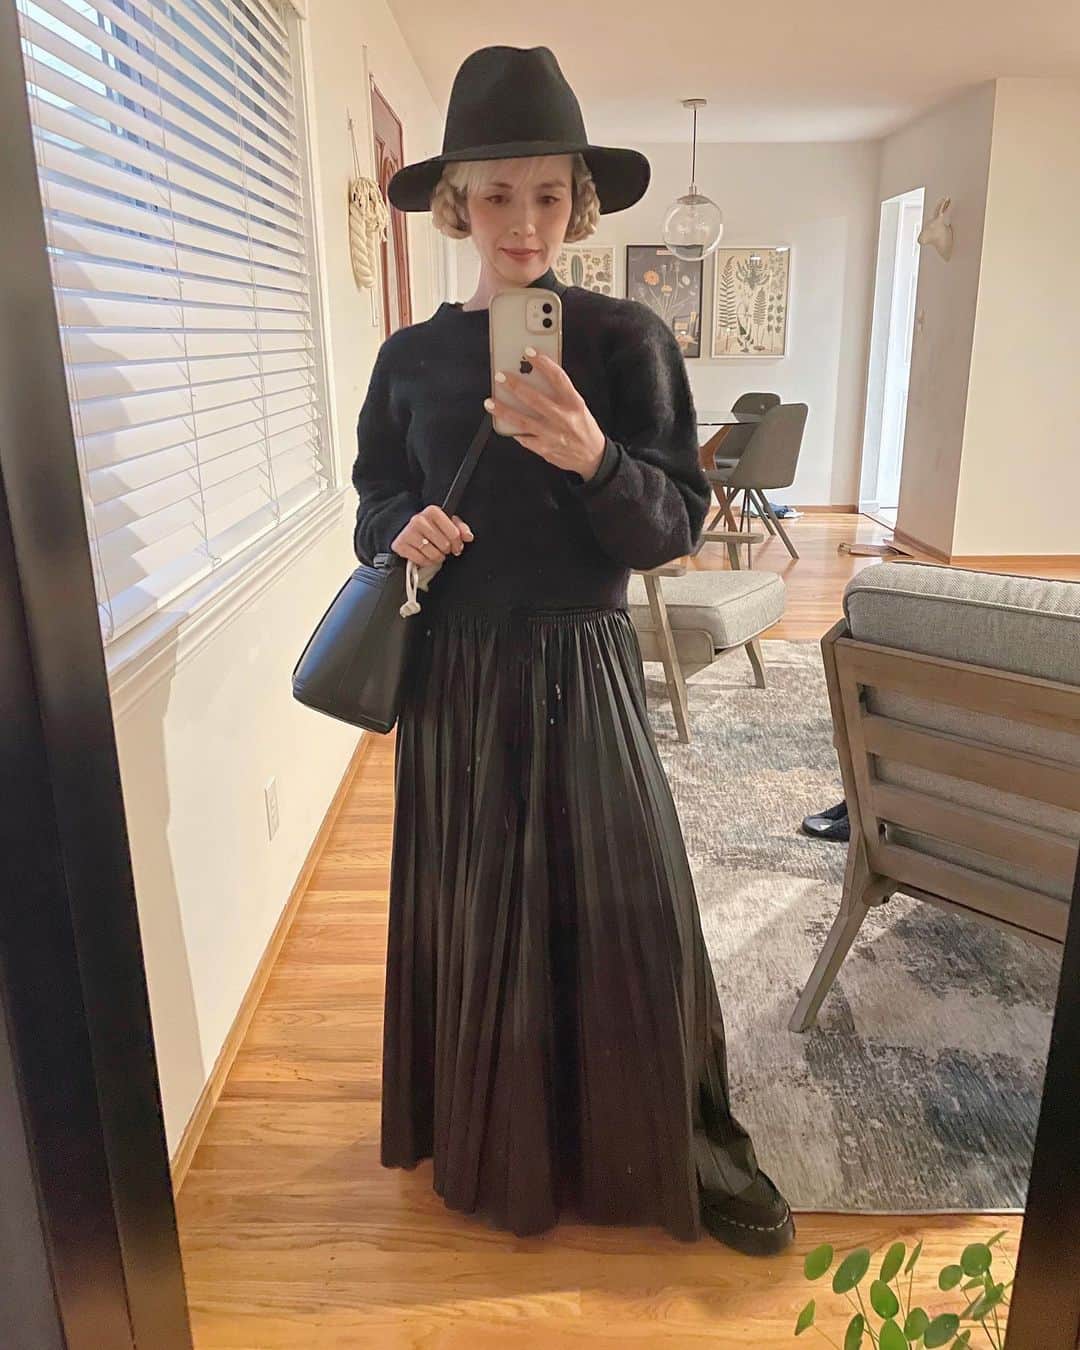 OLIVIAのインスタグラム：「Outfit of yesterday: Our family’s been into the goth look recently, inspired by Tim Burton’s recent TV show Wednesday. You’ll catch us posing for pictures with wide eyes and stoic facial expressions- inspi Addams Family. 🤣🤣🤣  Crystal of the week: My amethyst skull. I’ve been drawn to this purple color naturally the last few days- picking up purple flowers too. I’ve also been reaching outside my comfort zone a lot these days, so amethyst assists me with expansion while also providing me with some protection and helps me with grounding myself. I’ve been meditating everyday again since being back from Japan and when I meditate (aka not scatter brained) I get very good at energy reading, can connect with other dimensional spirits/beings and can get readings of the near future. Amethyst assists me with making these connections.   Flower of the week: Baby pink hyacinths. Hyacinths are know for their alluring fragrances but the name comes from complex symbolism through Greek Mythology. Pink hyacinths symbolize playful joy.」